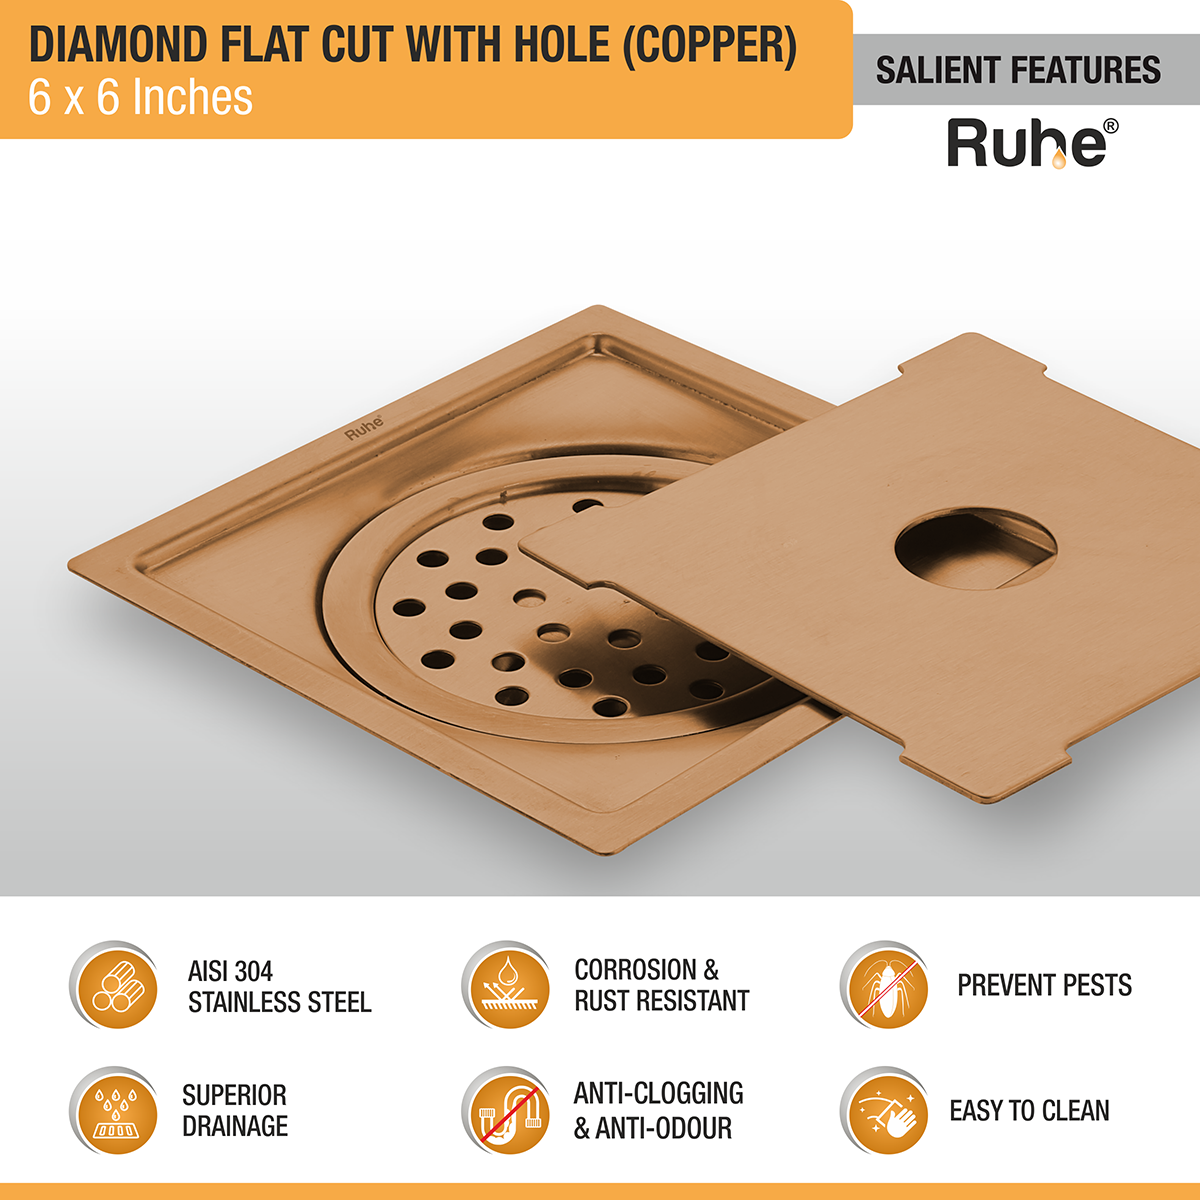 Diamond Square Flat Cut Floor Drain in Antique Copper PVD Coating (6 x 6 Inches) with Hole features